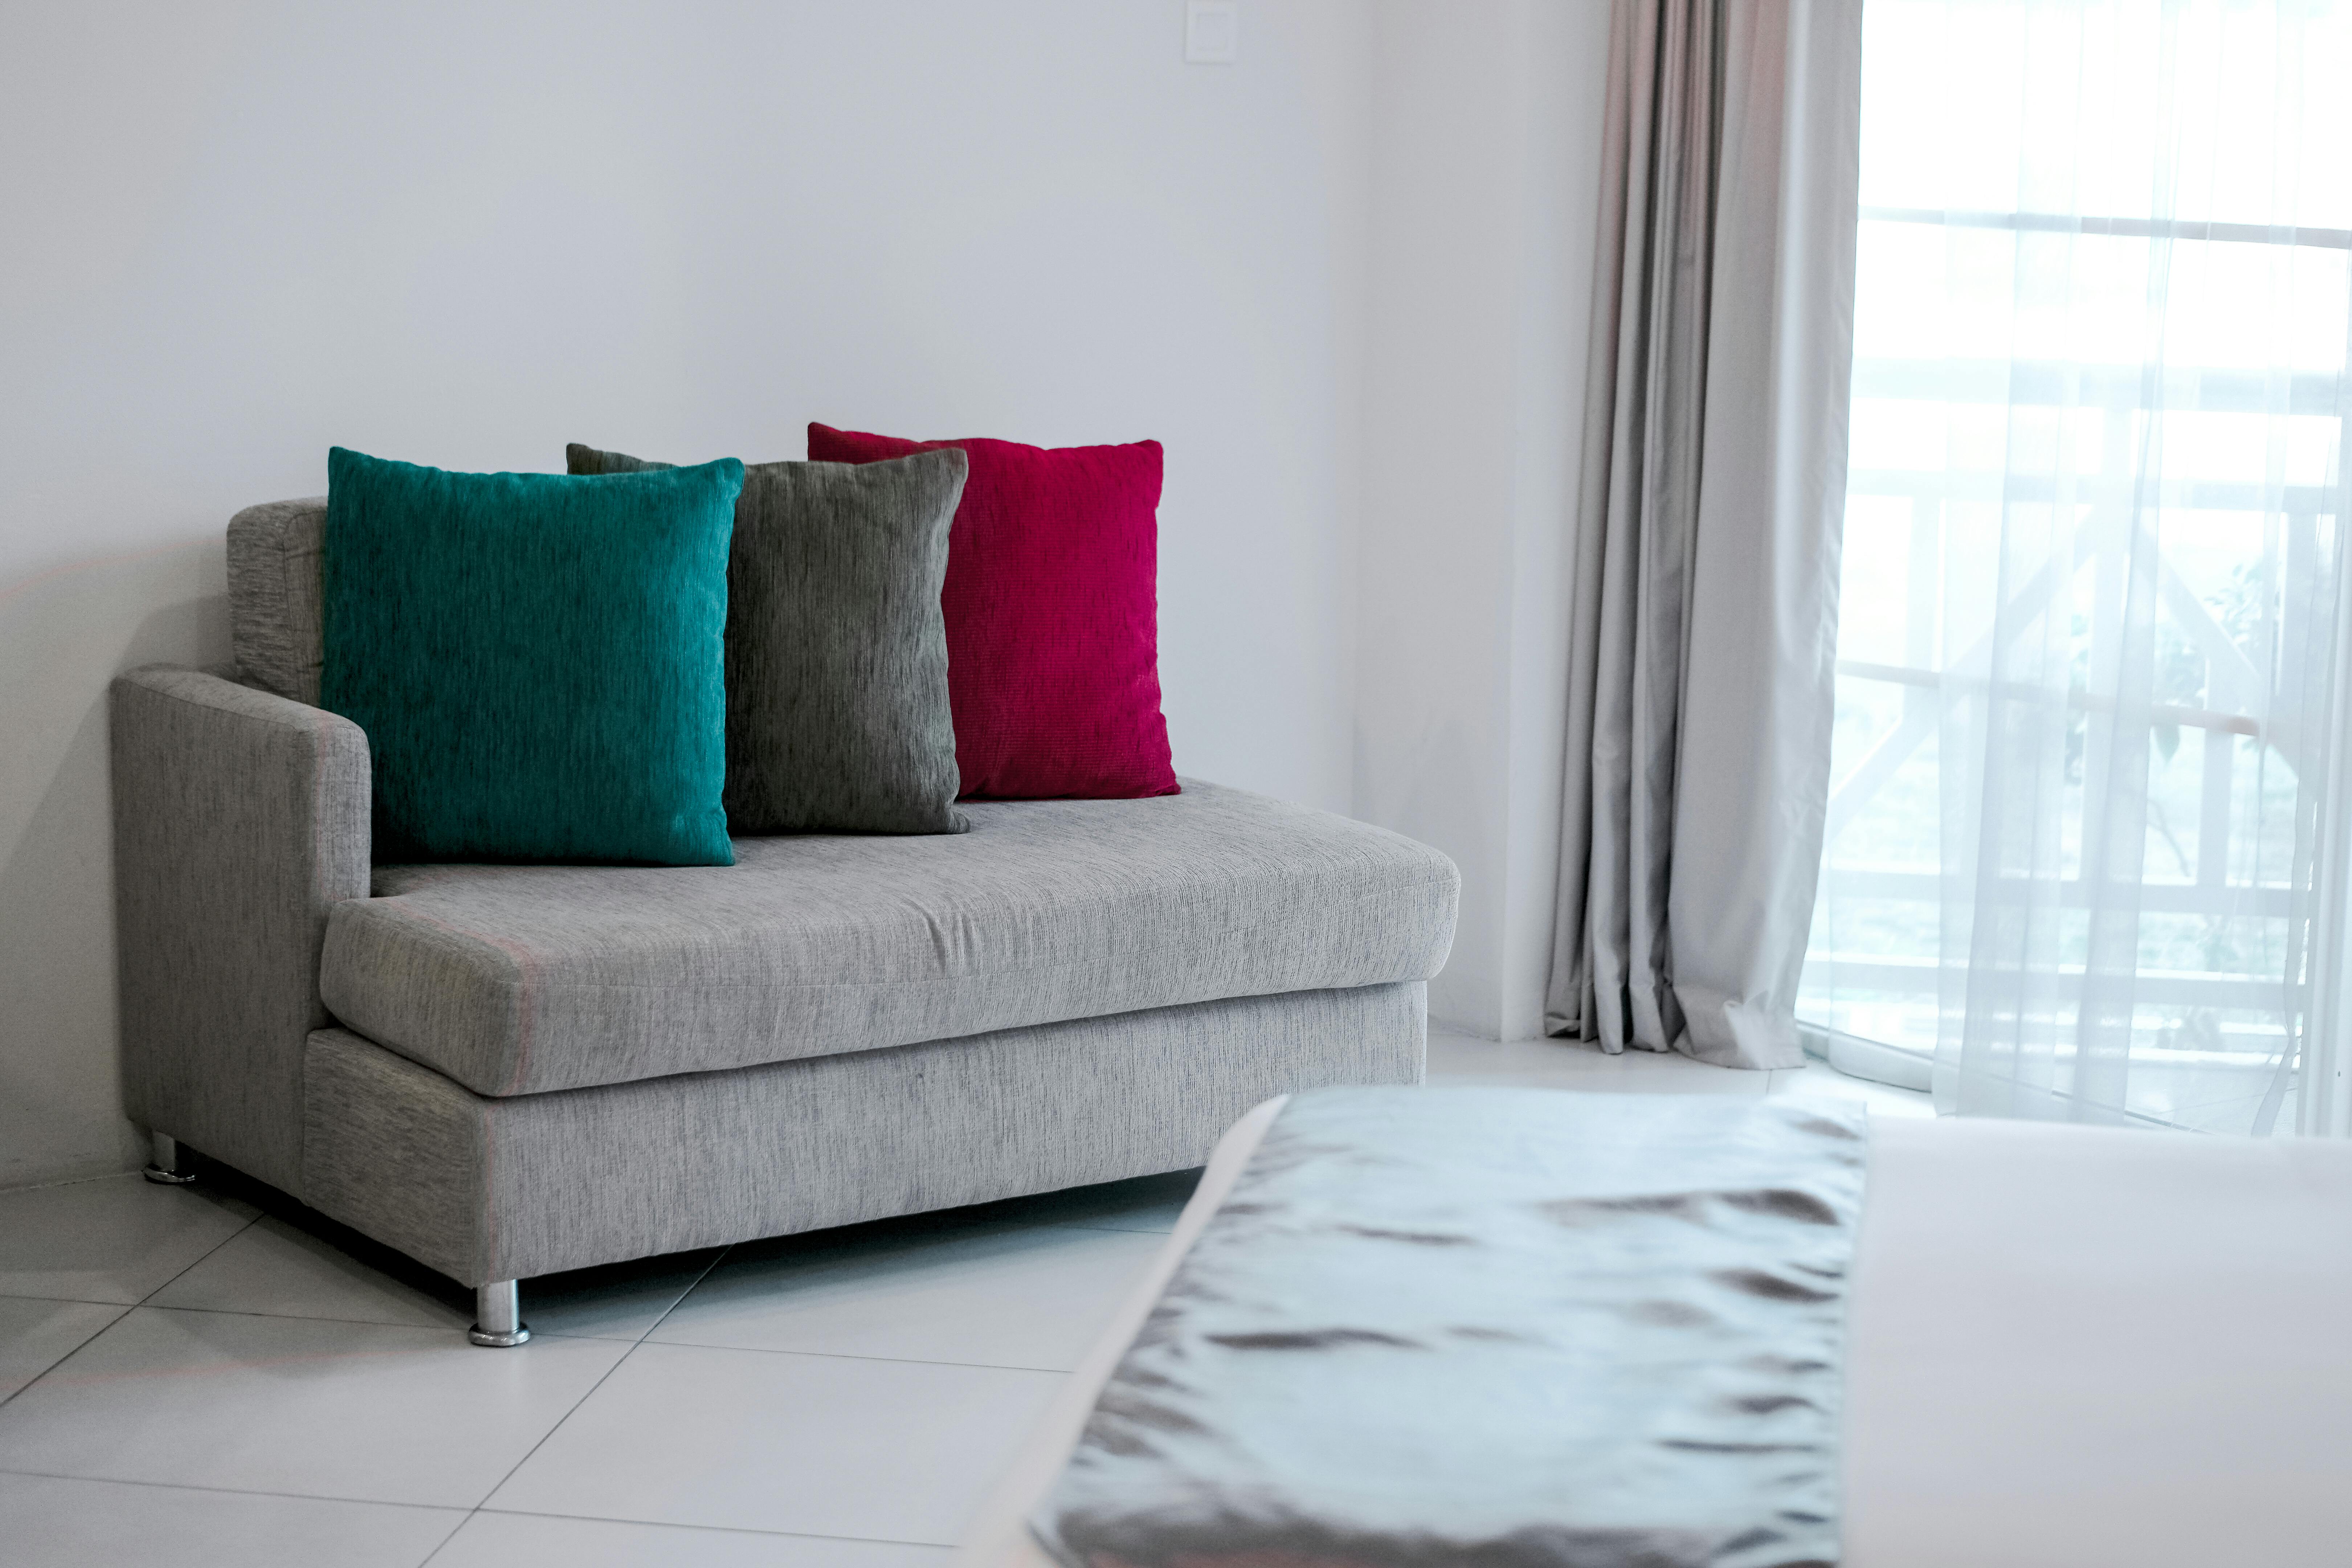 A small sofa decorated with throw  pillows | Source: Pexels